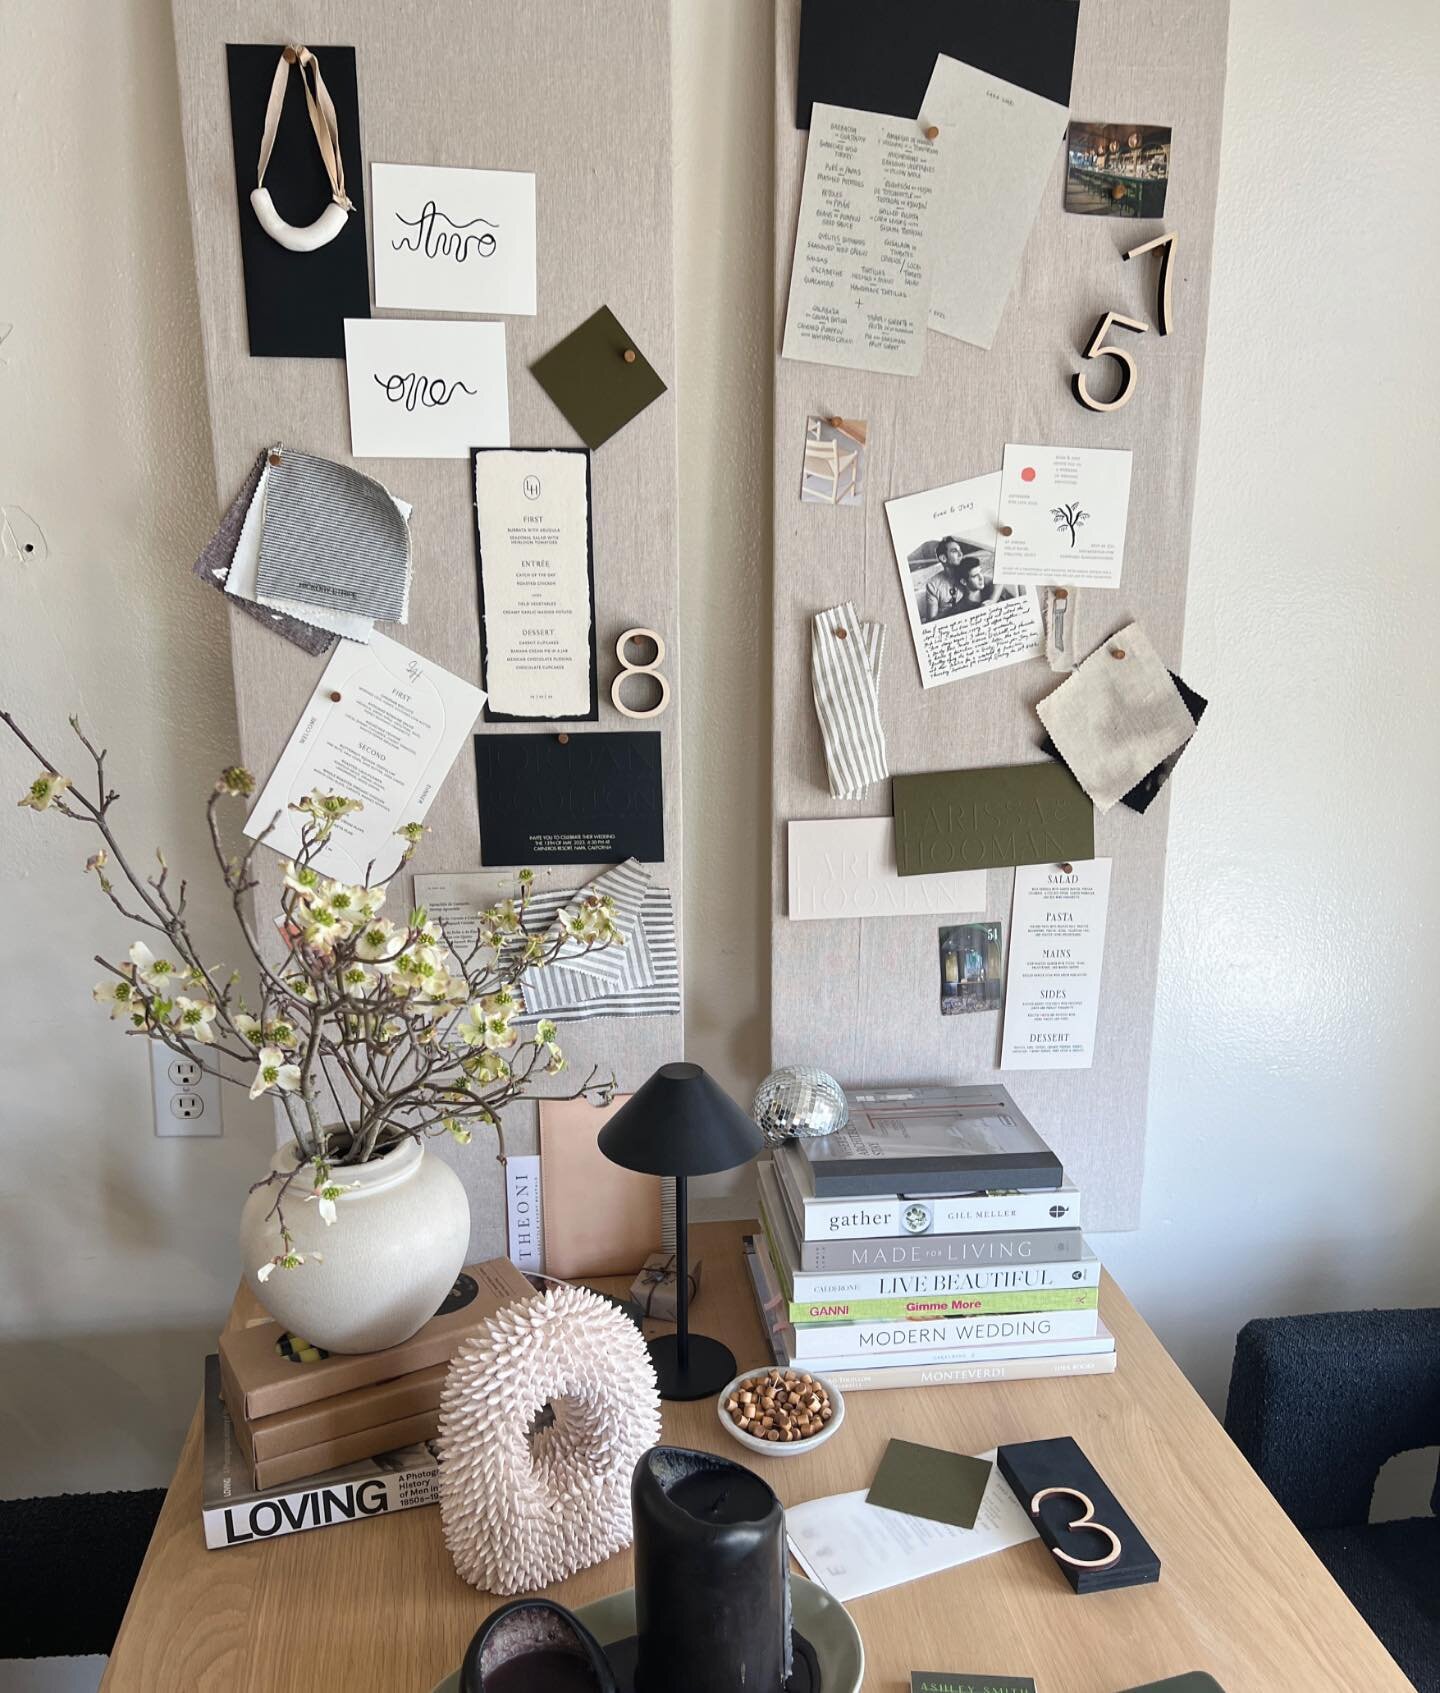 A little peek inside our office. With things that inspire, things we use, things past + present. As we push forward with a brand refresh, sharing our day-to-day feels really good.